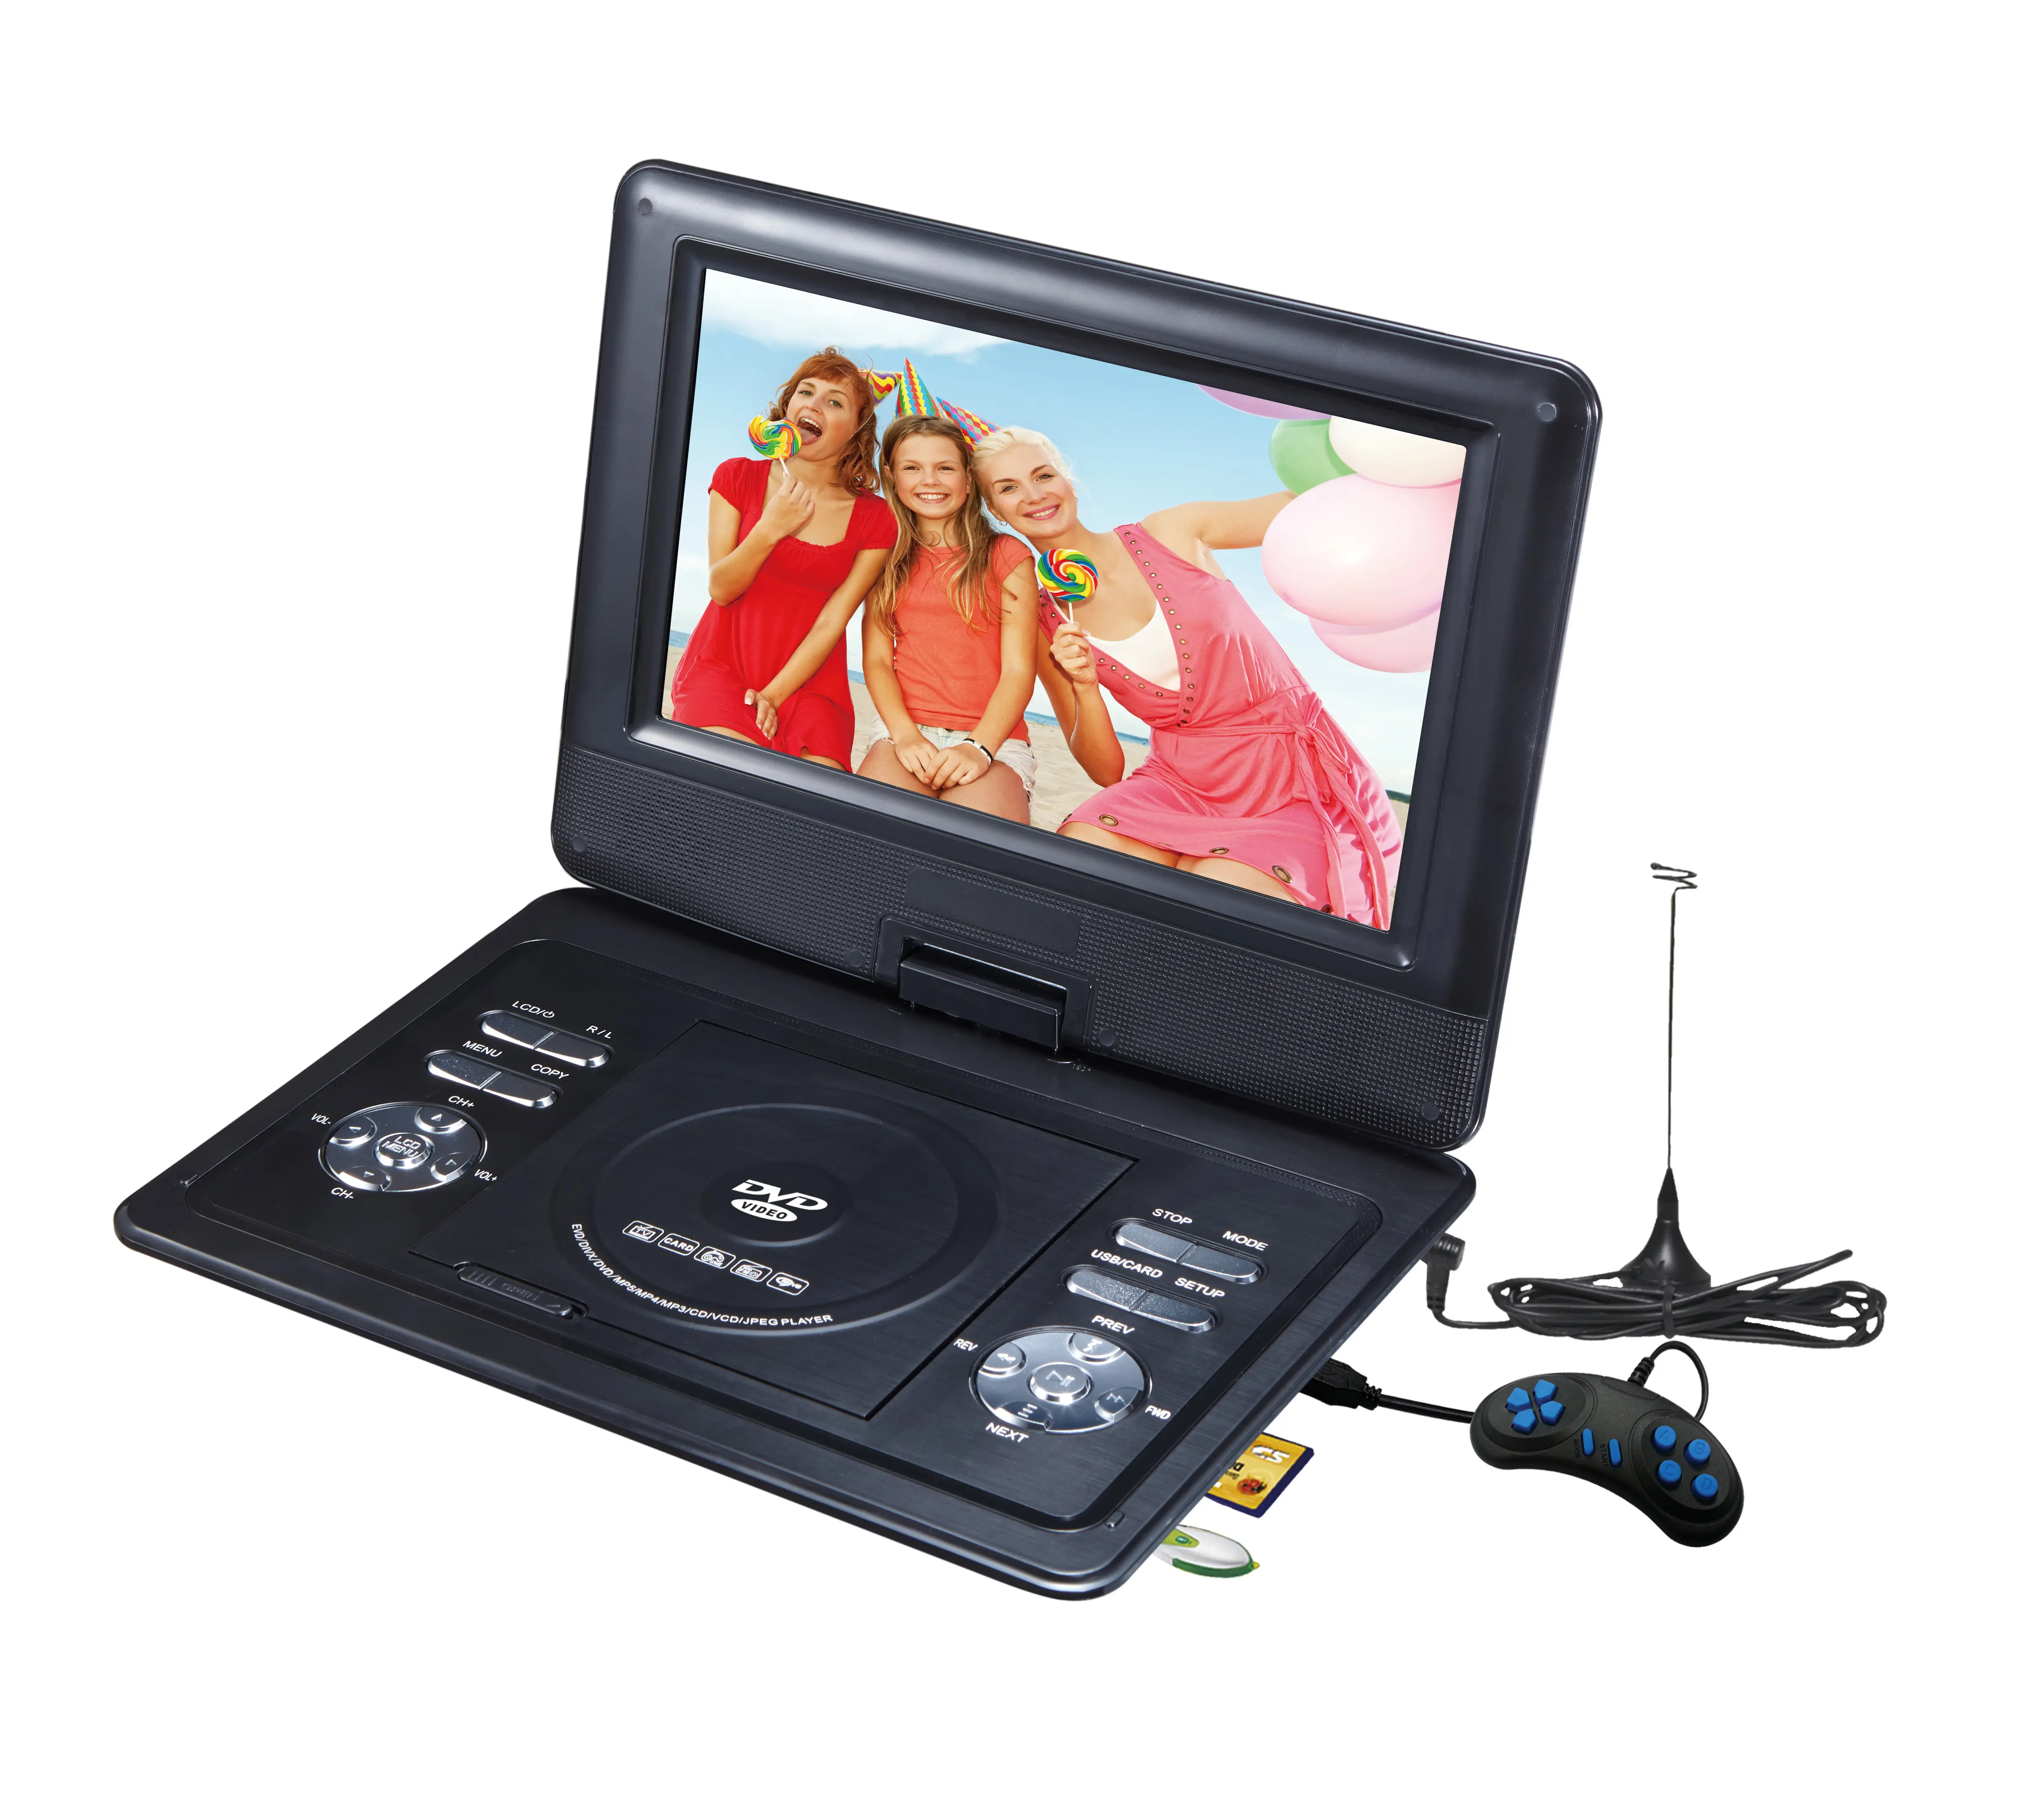 10.1 inch LED Screen Outdoor Rechargeable Battery Portable DVD Player